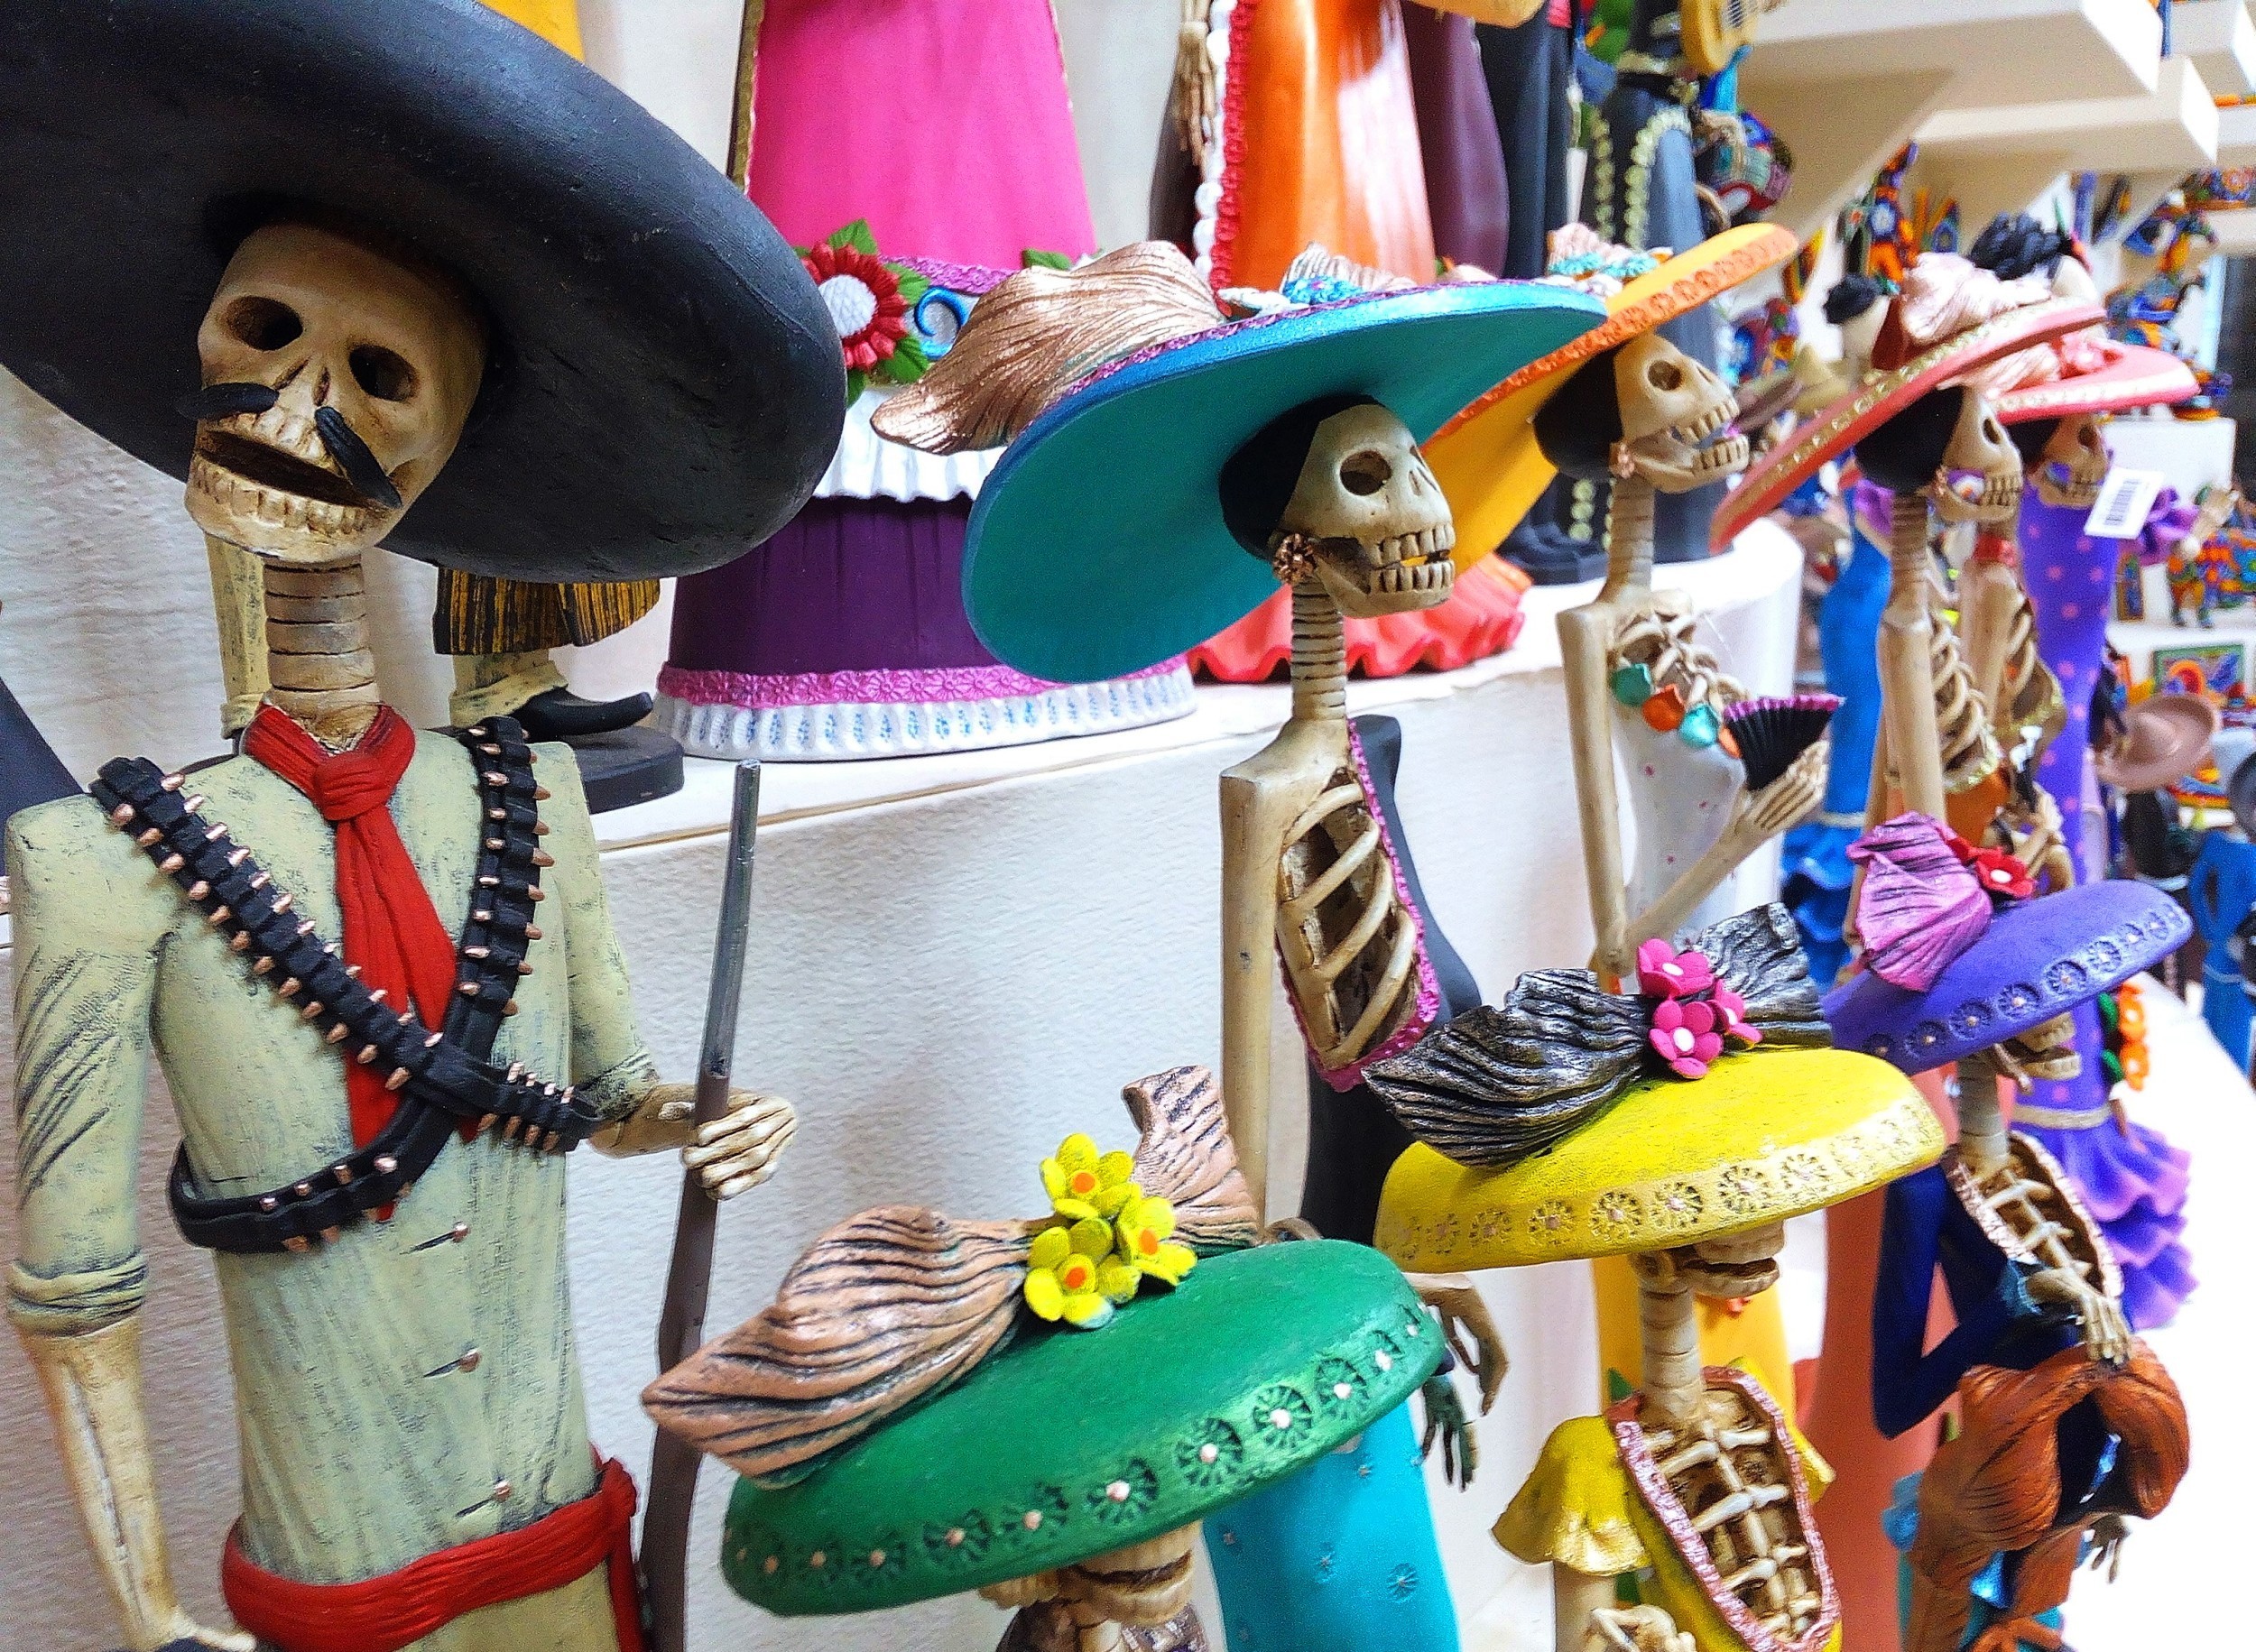 Traditional Mexican skulls (Calaveras), skeletons, La Muerte masks and other scary / death symbols of the Day of the Dead / Dia de los Muertos / Halloween, popular souvenirs sold in Mexico